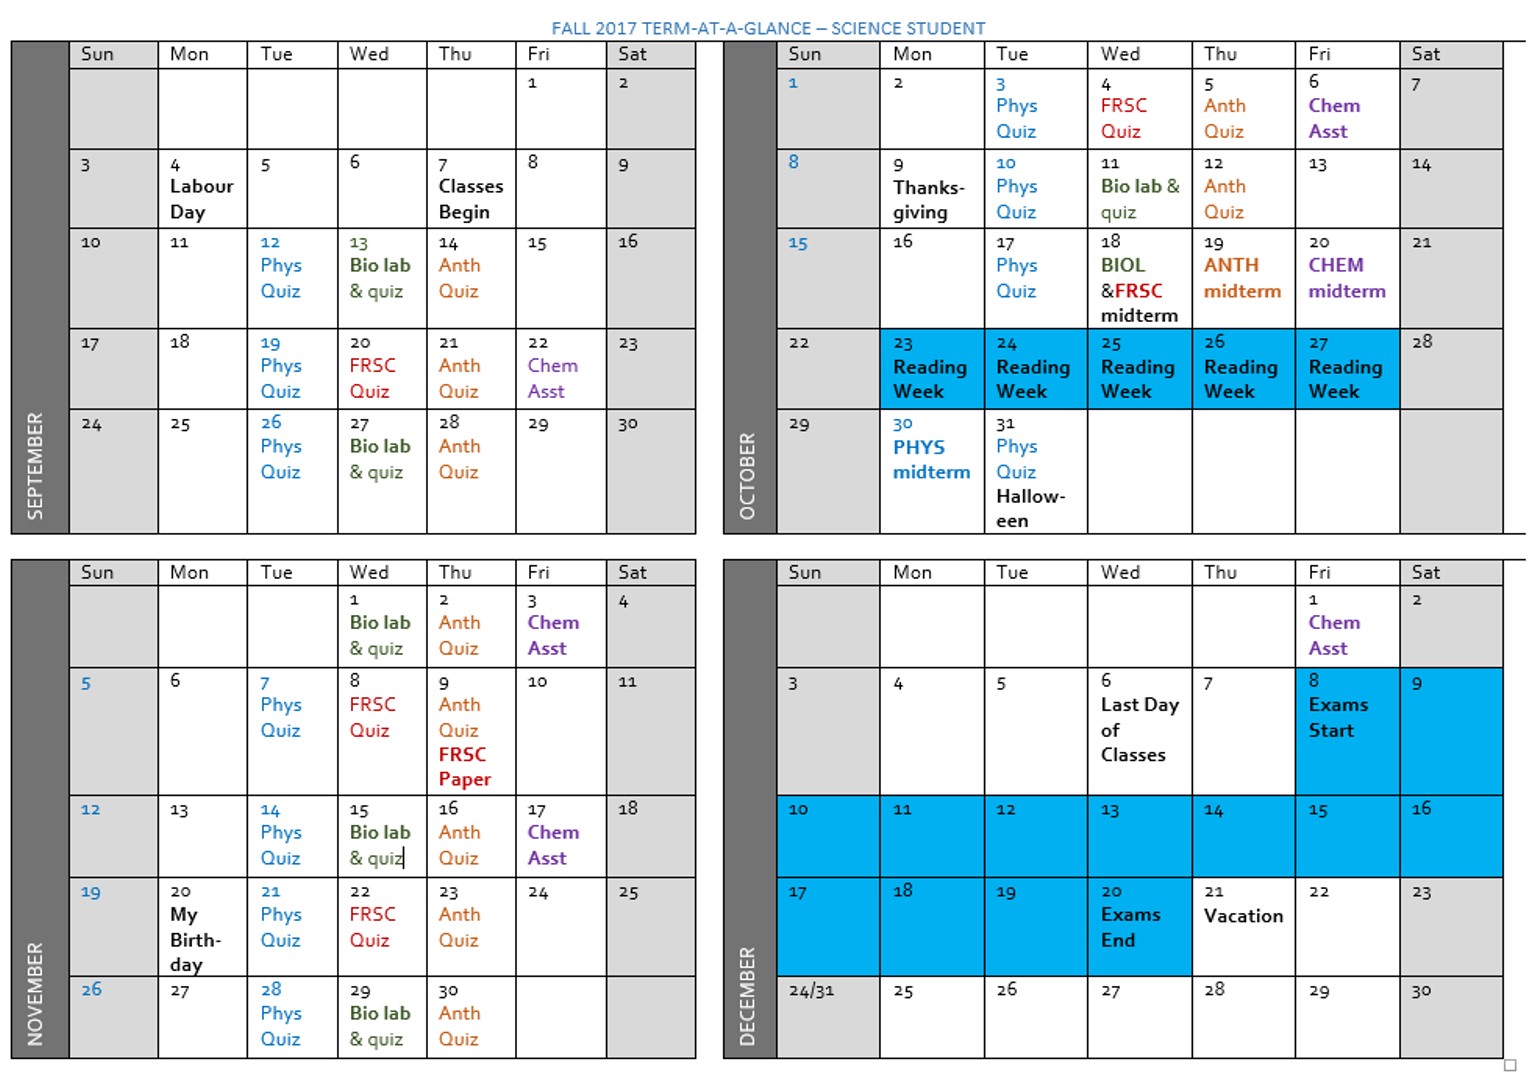 Sample calendar for fall term. Deadlines and test dates labelled and colour-coded. 